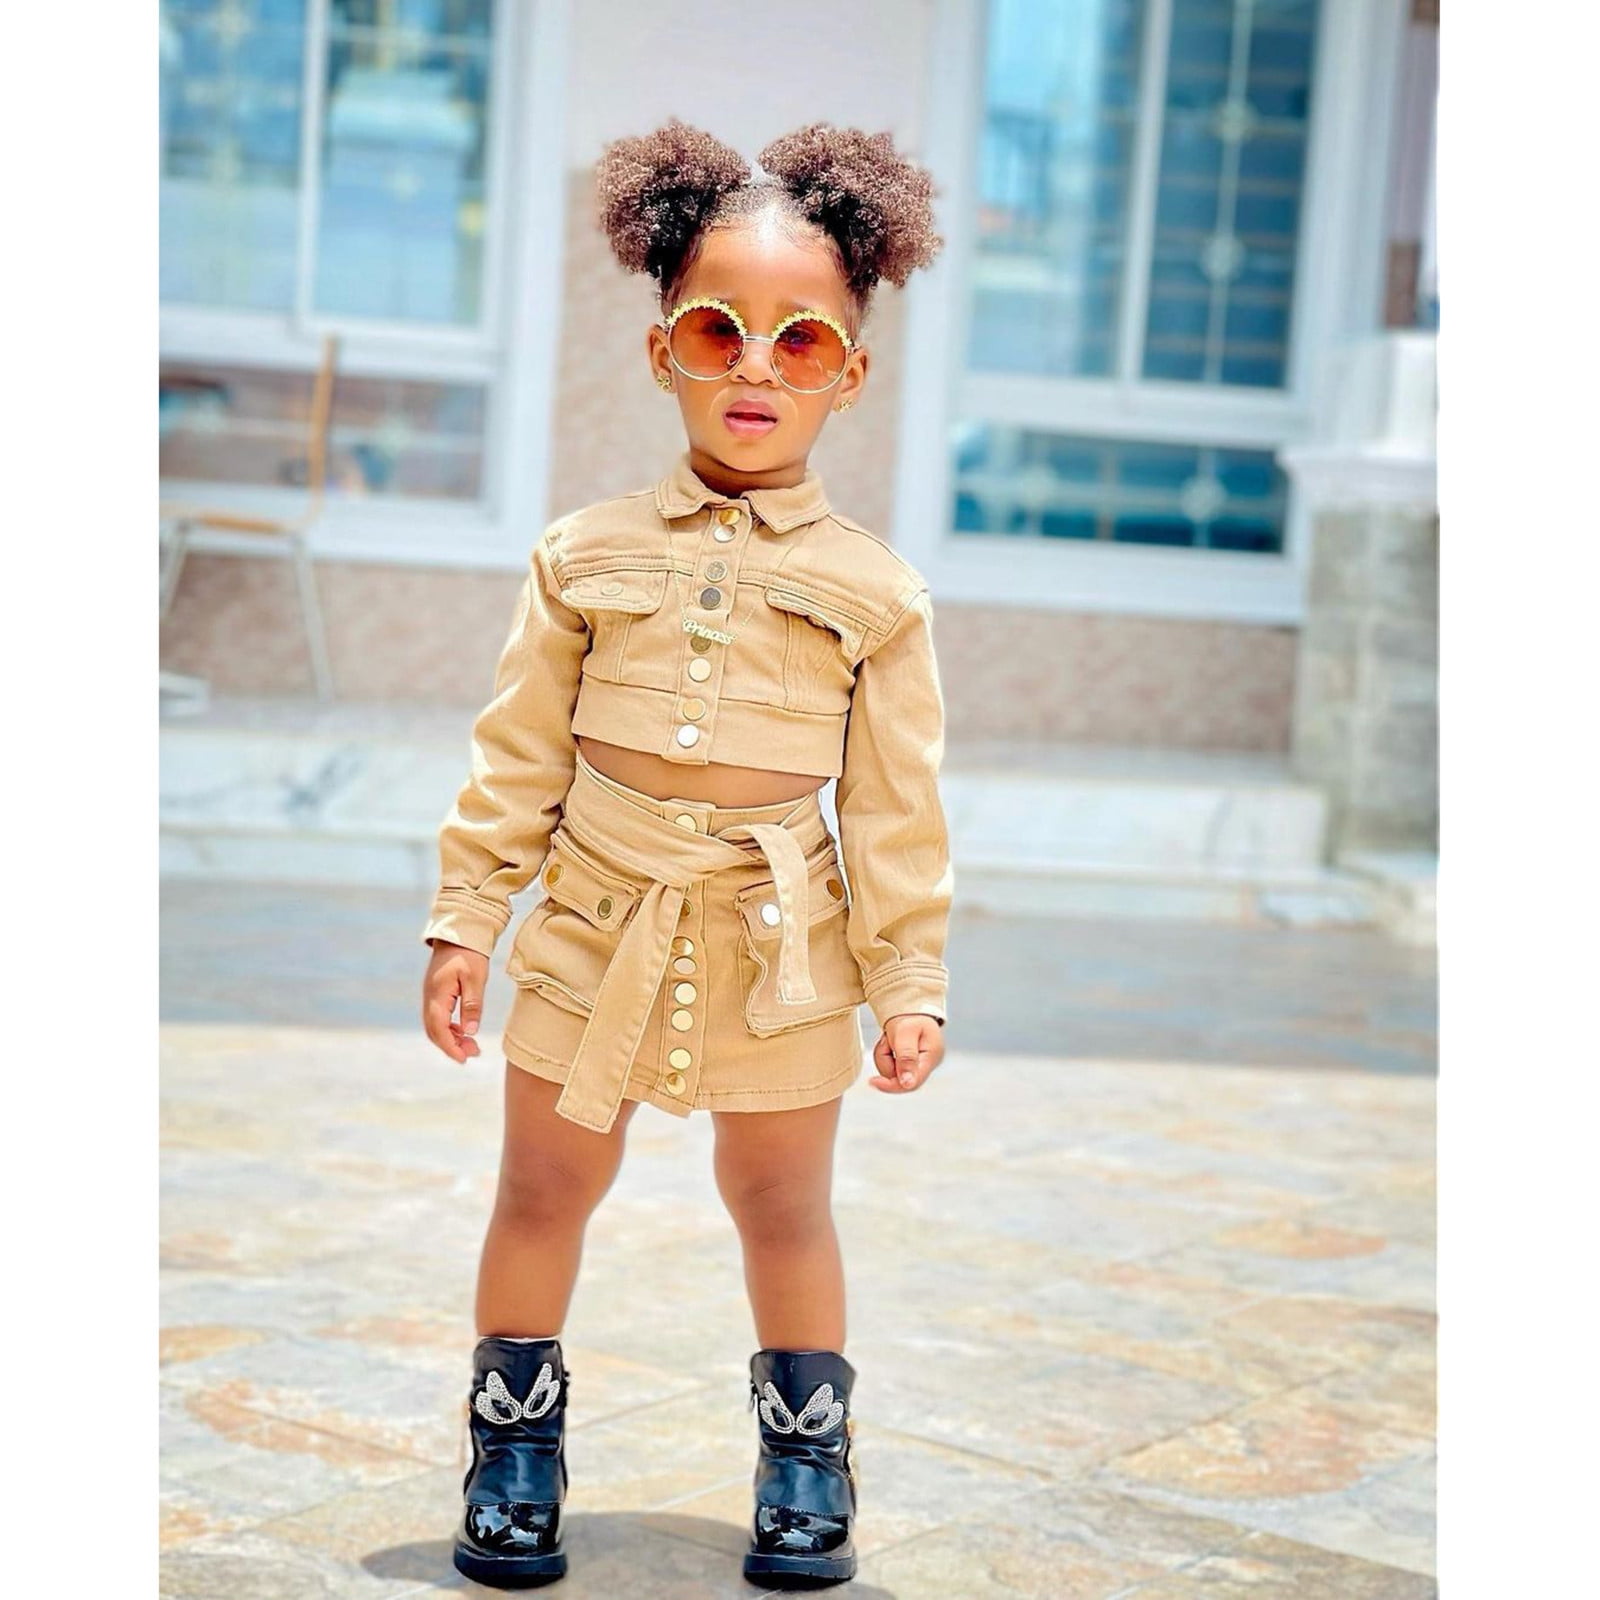 Rovga Girls Outfit Set Kids Long Sleeve Jacket Coat T Shirt Tops Bow Button  Skirts 2Pcs Outfits Clothes Set For 5-6 Years